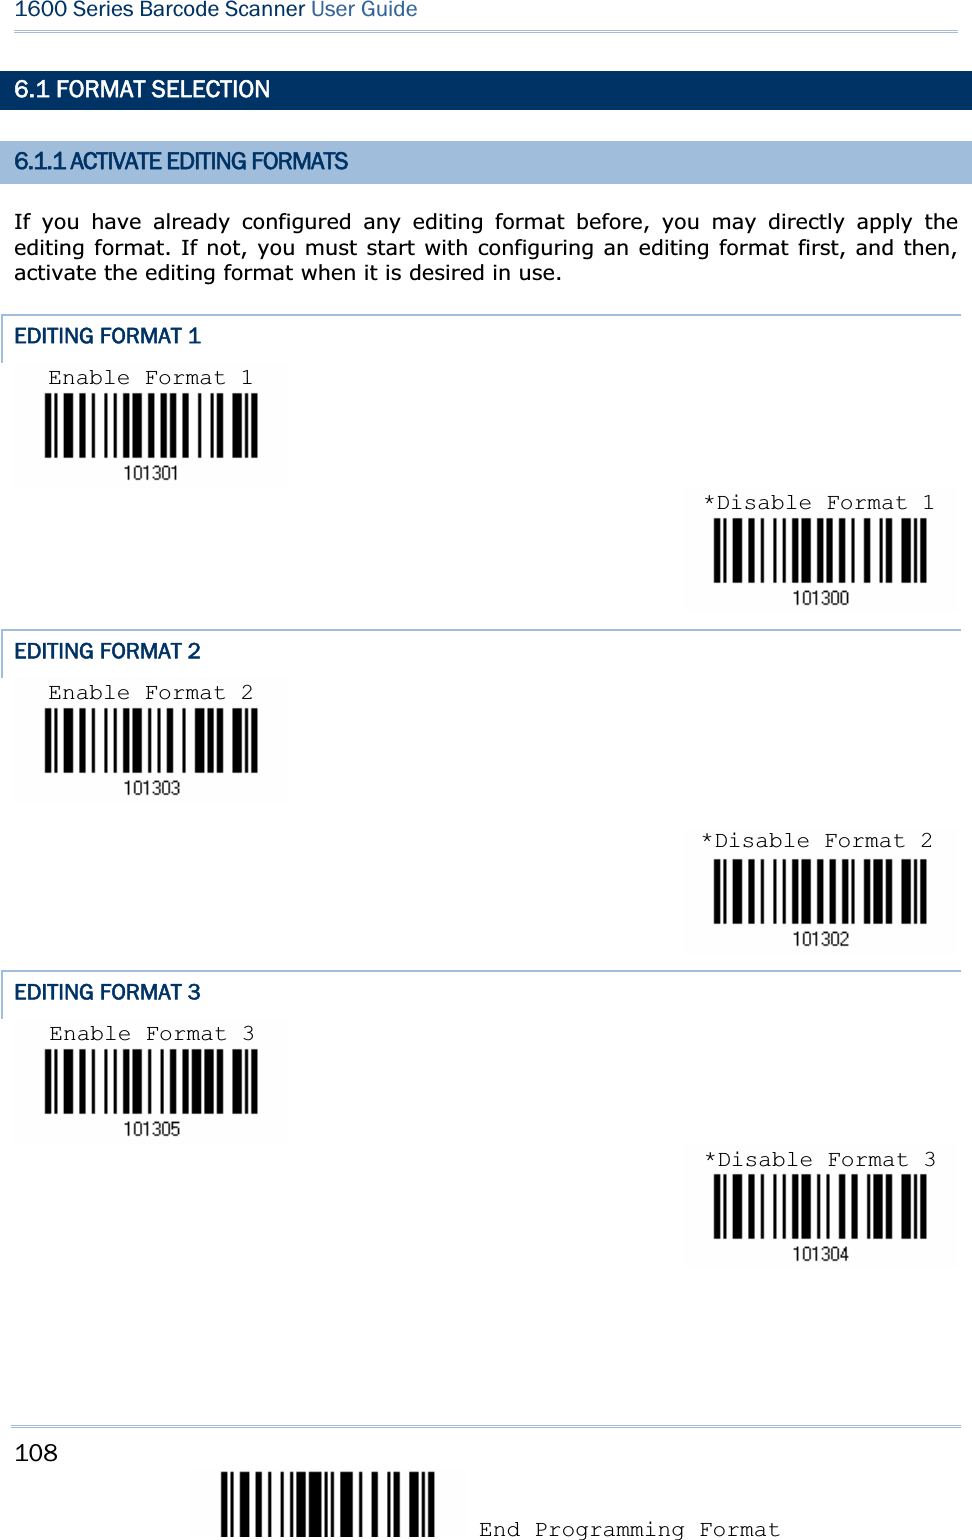 108 End Programming Format 1600 Series Barcode Scanner User Guide6.1 FORMAT SELECTION 6.1.1 ACTIVATE EDITING FORMATS If you have already configured any editing format before, you may directly apply the editing format. If not, you must start with configuring an editing format first, and then, activate the editing format when it is desired in use. EDITING FORMAT 1 EDITING FORMAT 2 EDITING FORMAT 3 Enable Format 1 *Disable Format 1Enable Format 2 *Disable Format 2Enable Format 3 *Disable Format 3